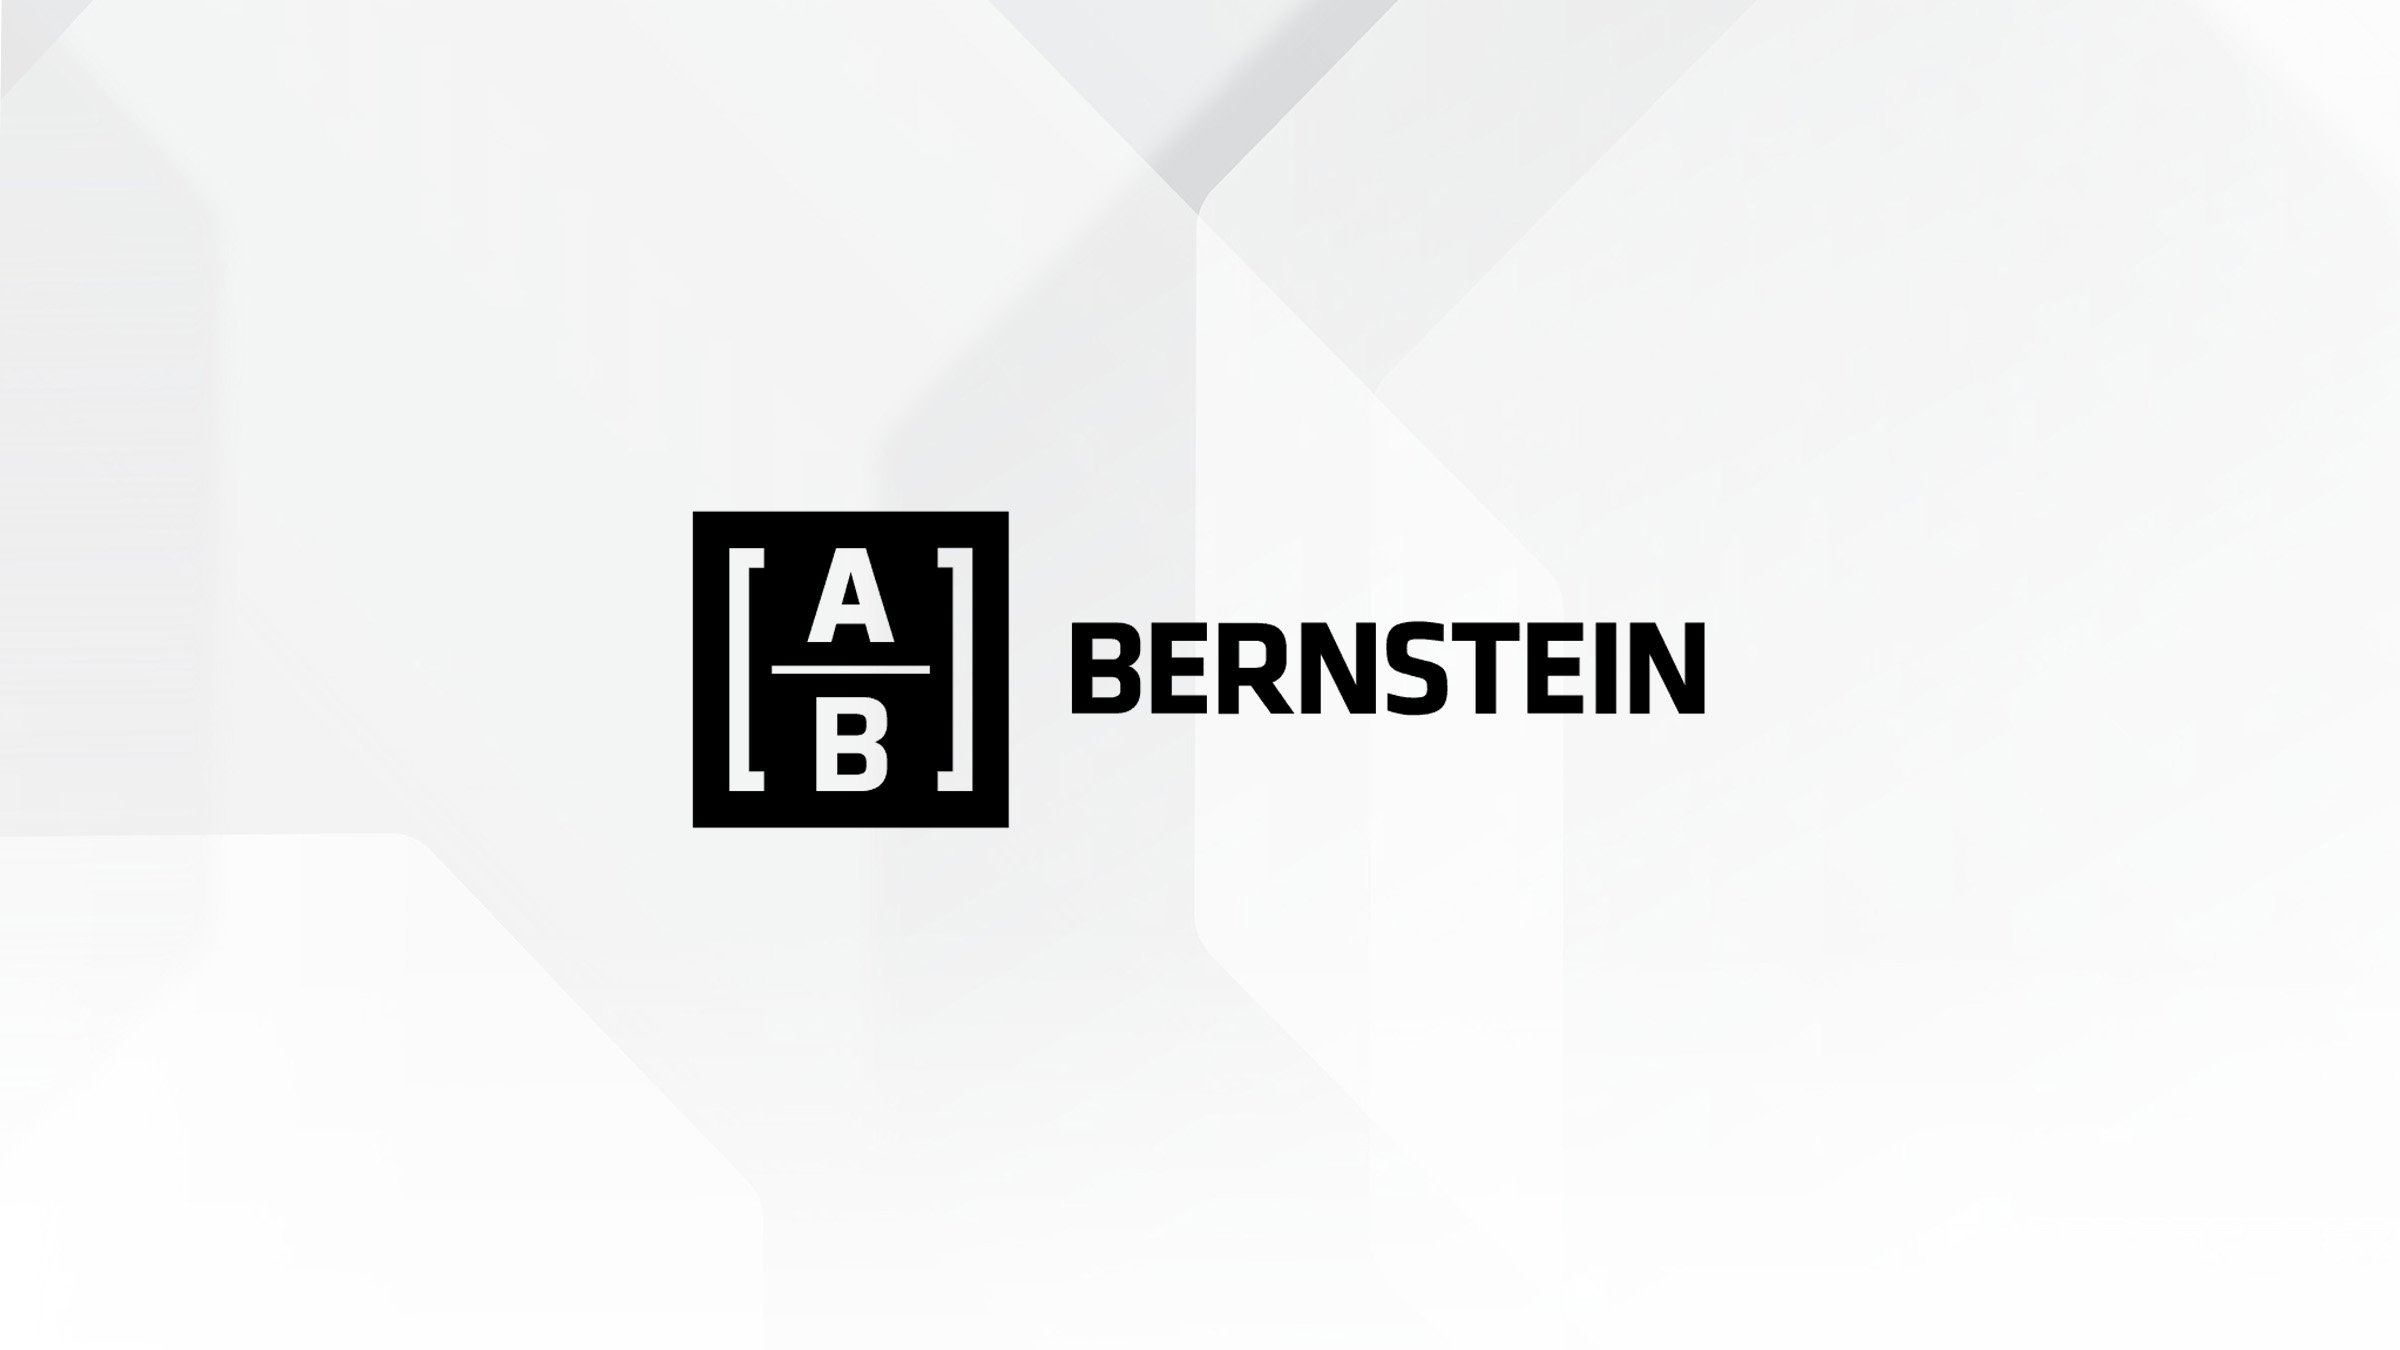 Bernstein’s 39th Annual Strategic Decisions Conference